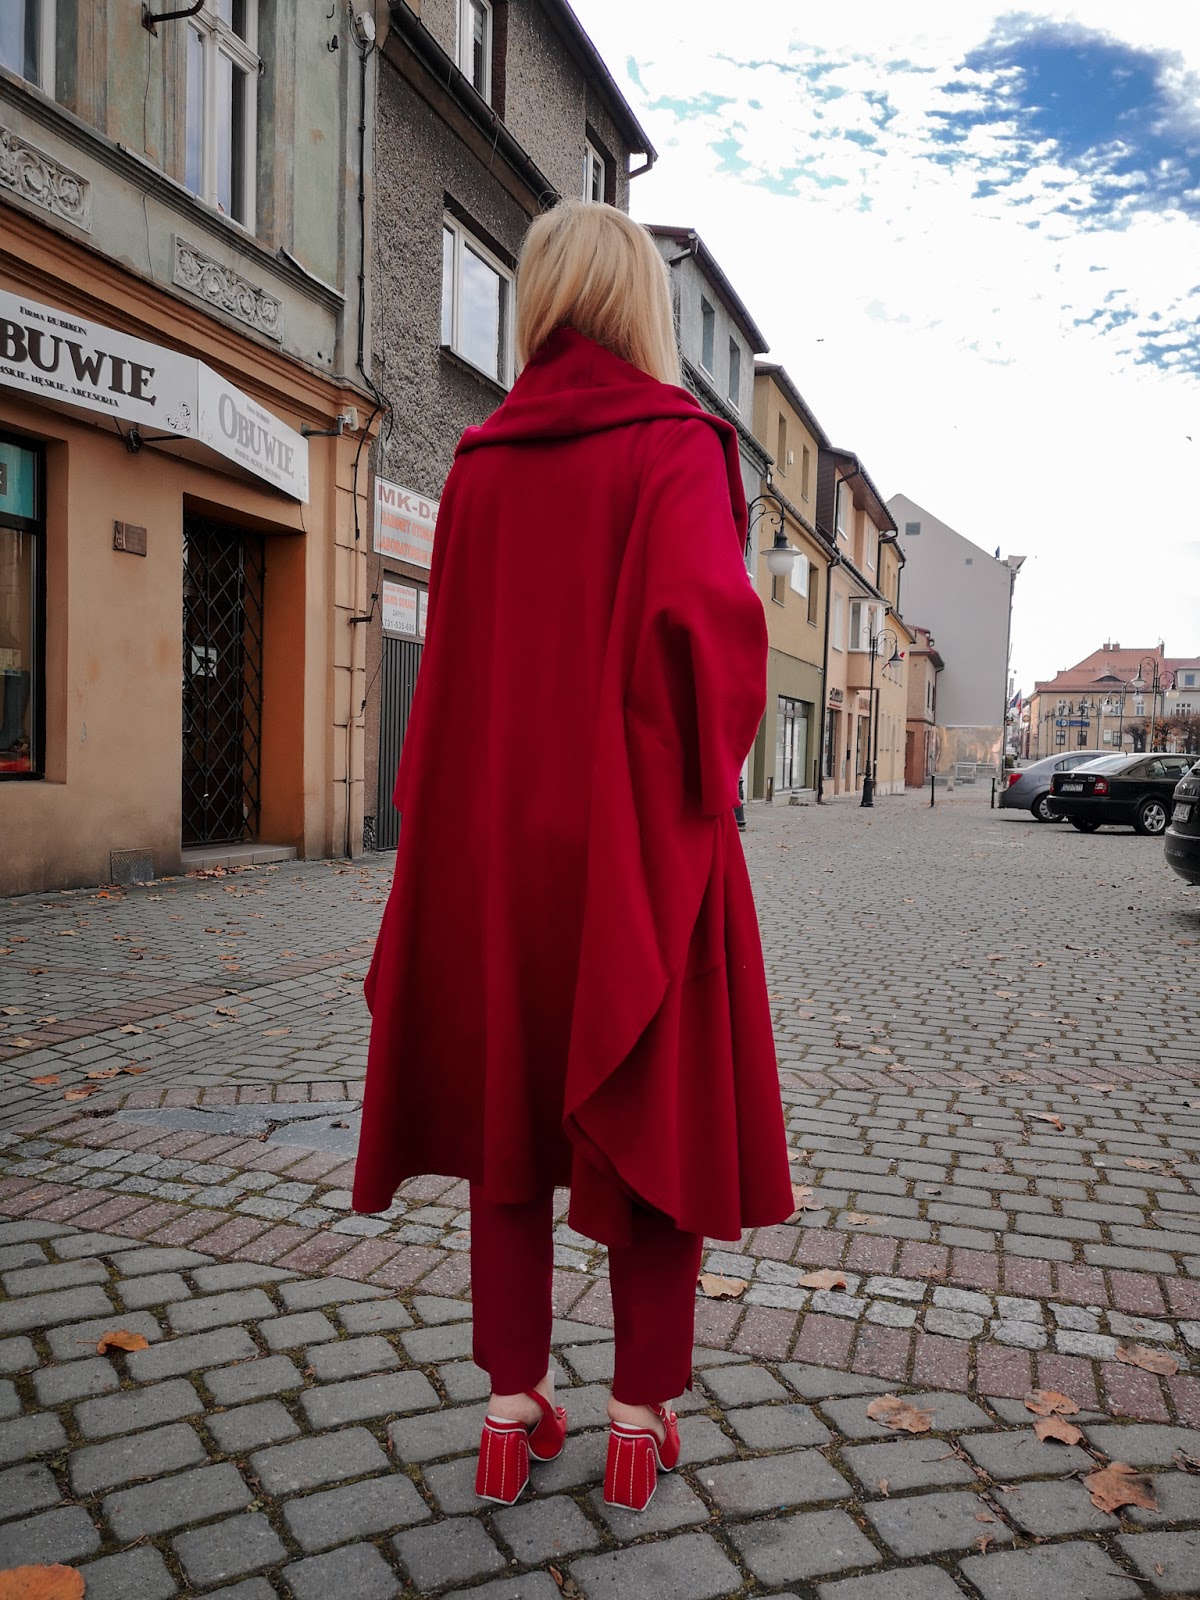  #redtotallook #fashion #inspiration #autumnvibes #red #jeffreycampbell #poncho #redponcho 